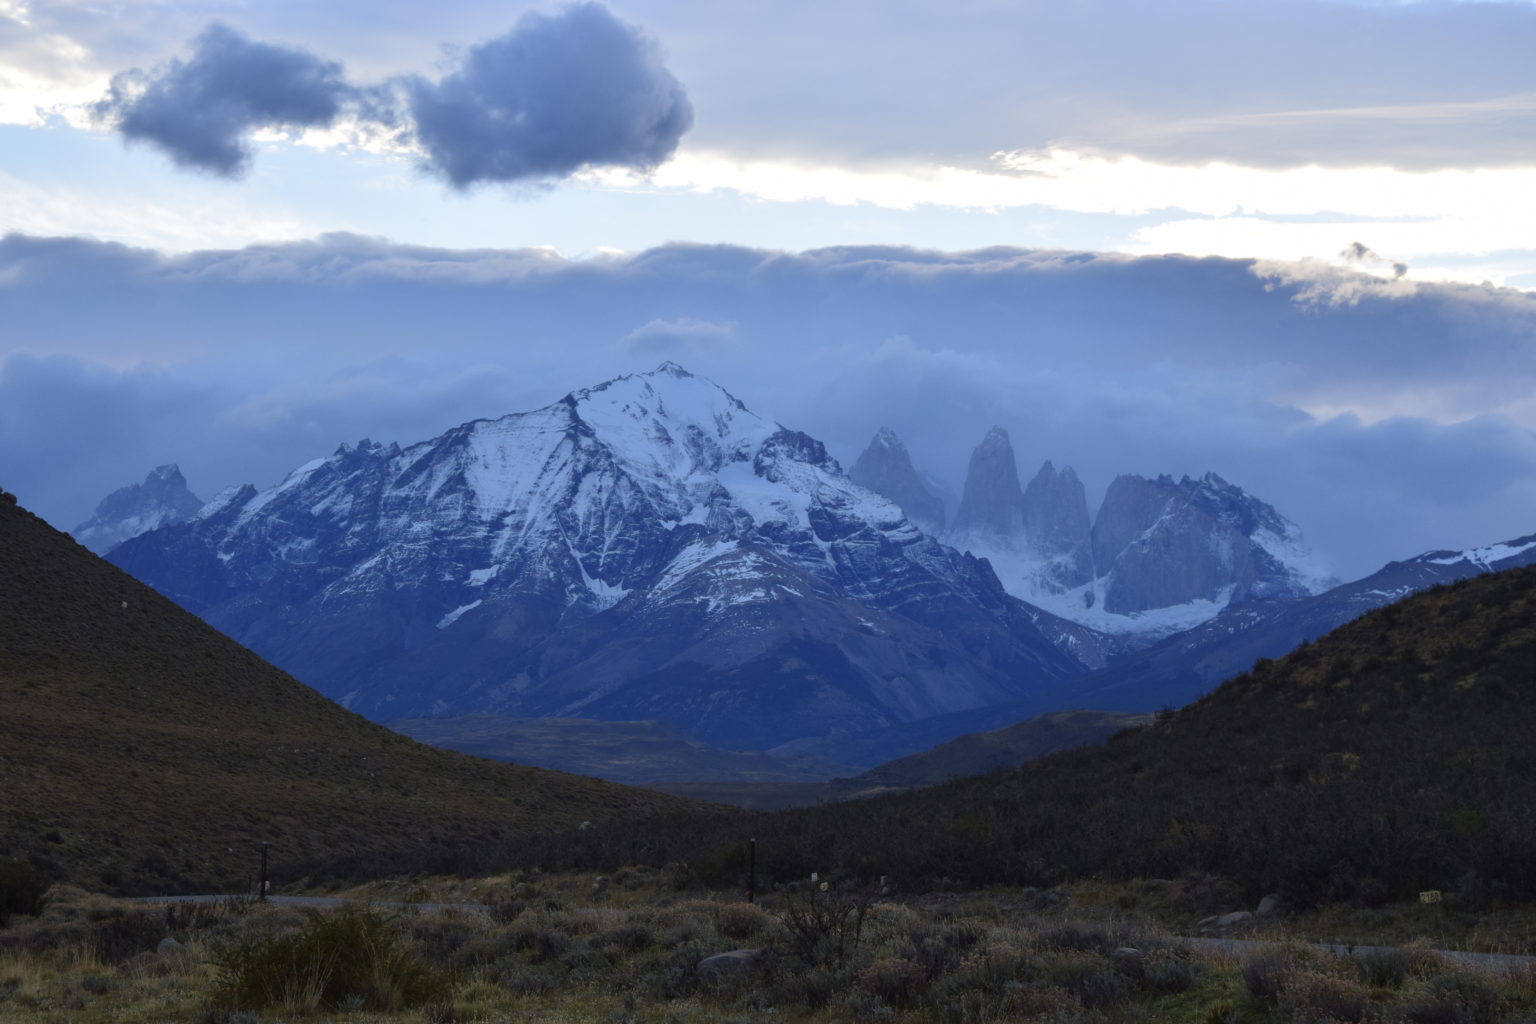 View of the Torres del Paine torres from the road into the park